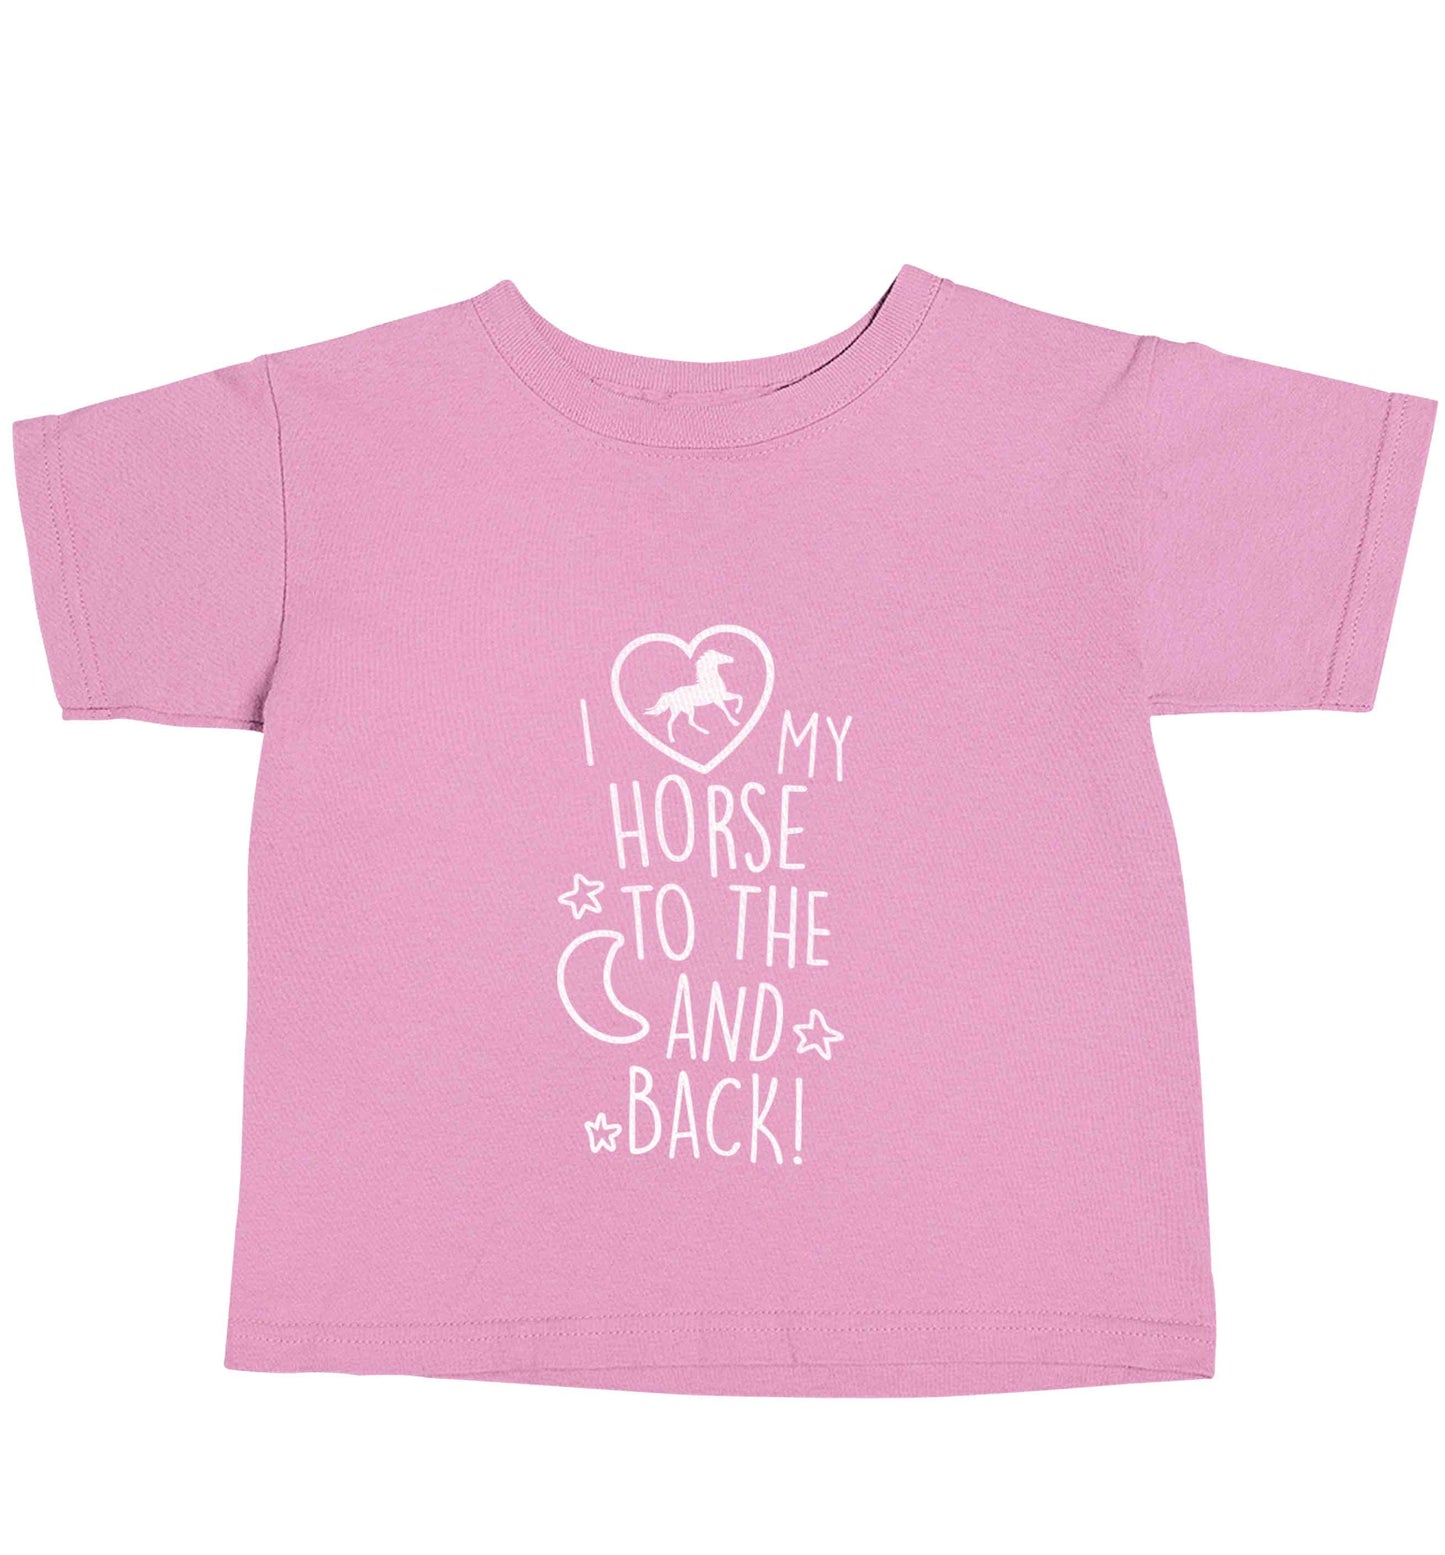 I love my horse to the moon and back light pink baby toddler Tshirt 2 Years